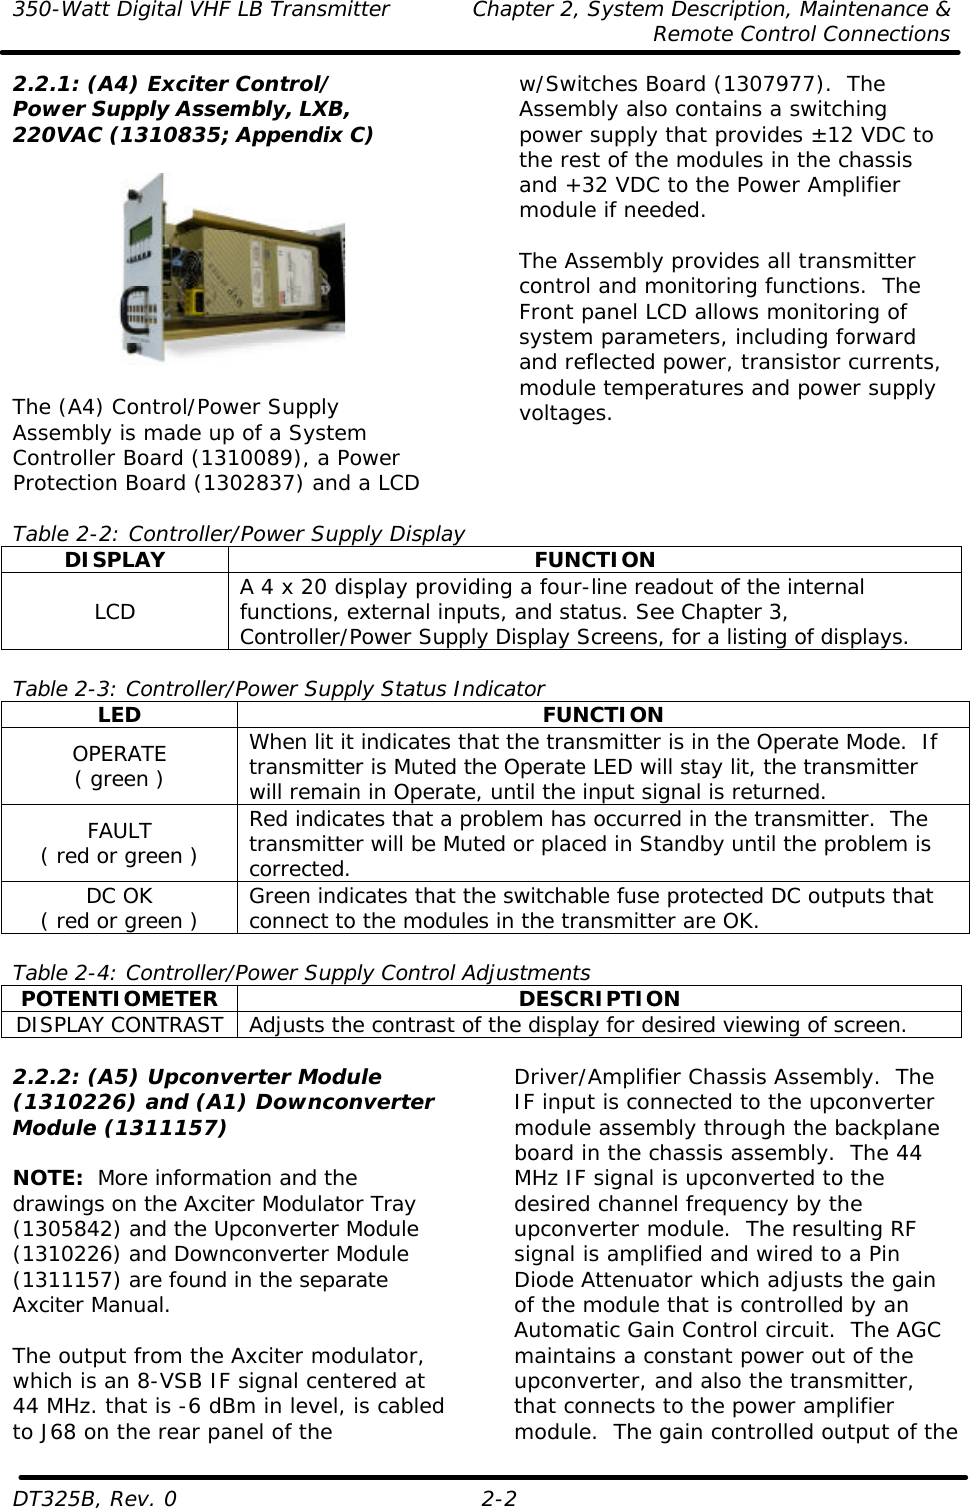 350-Watt Digital VHF LB Transmitter Chapter 2, System Description, Maintenance &amp;     Remote Control Connections  DT325B, Rev. 0 2-2 2.2.1: (A4) Exciter Control/ Power Supply Assembly, LXB, 220VAC (1310835; Appendix C)    The (A4) Control/Power Supply Assembly is made up of a System Controller Board (1310089), a Power Protection Board (1302837) and a LCD w/Switches Board (1307977).  The Assembly also contains a switching power supply that provides ±12 VDC to the rest of the modules in the chassis and +32 VDC to the Power Amplifier module if needed.  The Assembly provides all transmitter control and monitoring functions.  The Front panel LCD allows monitoring of system parameters, including forward and reflected power, transistor currents, module temperatures and power supply voltages.   Table 2-2: Controller/Power Supply Display DISPLAY FUNCTION LCD A 4 x 20 display providing a four-line readout of the internal functions, external inputs, and status. See Chapter 3, Controller/Power Supply Display Screens, for a listing of displays.  Table 2-3: Controller/Power Supply Status Indicator LED FUNCTION OPERATE ( green ) When lit it indicates that the transmitter is in the Operate Mode.  If transmitter is Muted the Operate LED will stay lit, the transmitter will remain in Operate, until the input signal is returned. FAULT ( red or green ) Red indicates that a problem has occurred in the transmitter.  The transmitter will be Muted or placed in Standby until the problem is corrected. DC OK ( red or green ) Green indicates that the switchable fuse protected DC outputs that connect to the modules in the transmitter are OK.  Table 2-4: Controller/Power Supply Control Adjustments POTENTIOMETER DESCRIPTION DISPLAY CONTRAST Adjusts the contrast of the display for desired viewing of screen.  2.2.2: (A5) Upconverter Module (1310226) and (A1) Downconverter Module (1311157)  NOTE:  More information and the drawings on the Axciter Modulator Tray (1305842) and the Upconverter Module (1310226) and Downconverter Module (1311157) are found in the separate Axciter Manual.  The output from the Axciter modulator, which is an 8-VSB IF signal centered at 44 MHz. that is -6 dBm in level, is cabled to J68 on the rear panel of the Driver/Amplifier Chassis Assembly.  The IF input is connected to the upconverter module assembly through the backplane board in the chassis assembly.  The 44 MHz IF signal is upconverted to the desired channel frequency by the upconverter module.  The resulting RF signal is amplified and wired to a Pin Diode Attenuator which adjusts the gain of the module that is controlled by an Automatic Gain Control circuit.  The AGC maintains a constant power out of the upconverter, and also the transmitter, that connects to the power amplifier module.  The gain controlled output of the 